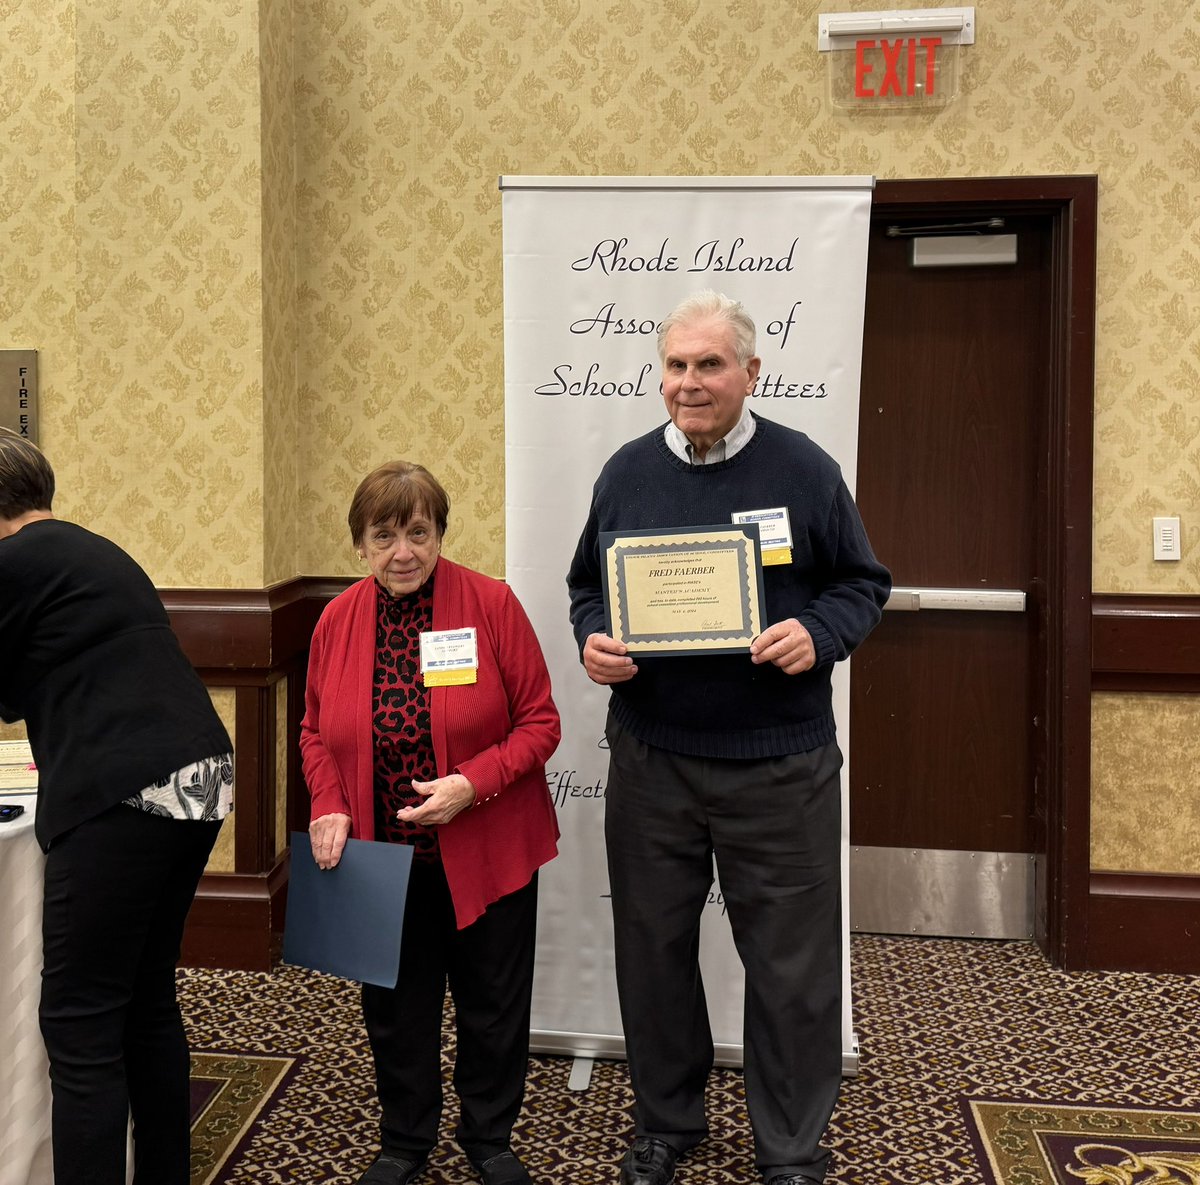 The RI School Committee Association recently recognized members for professional development completion. Congratulations Karen McDaid (50+ hours), Emily Copeland (100+ hours), and Fred Faerber (200+ hours)!